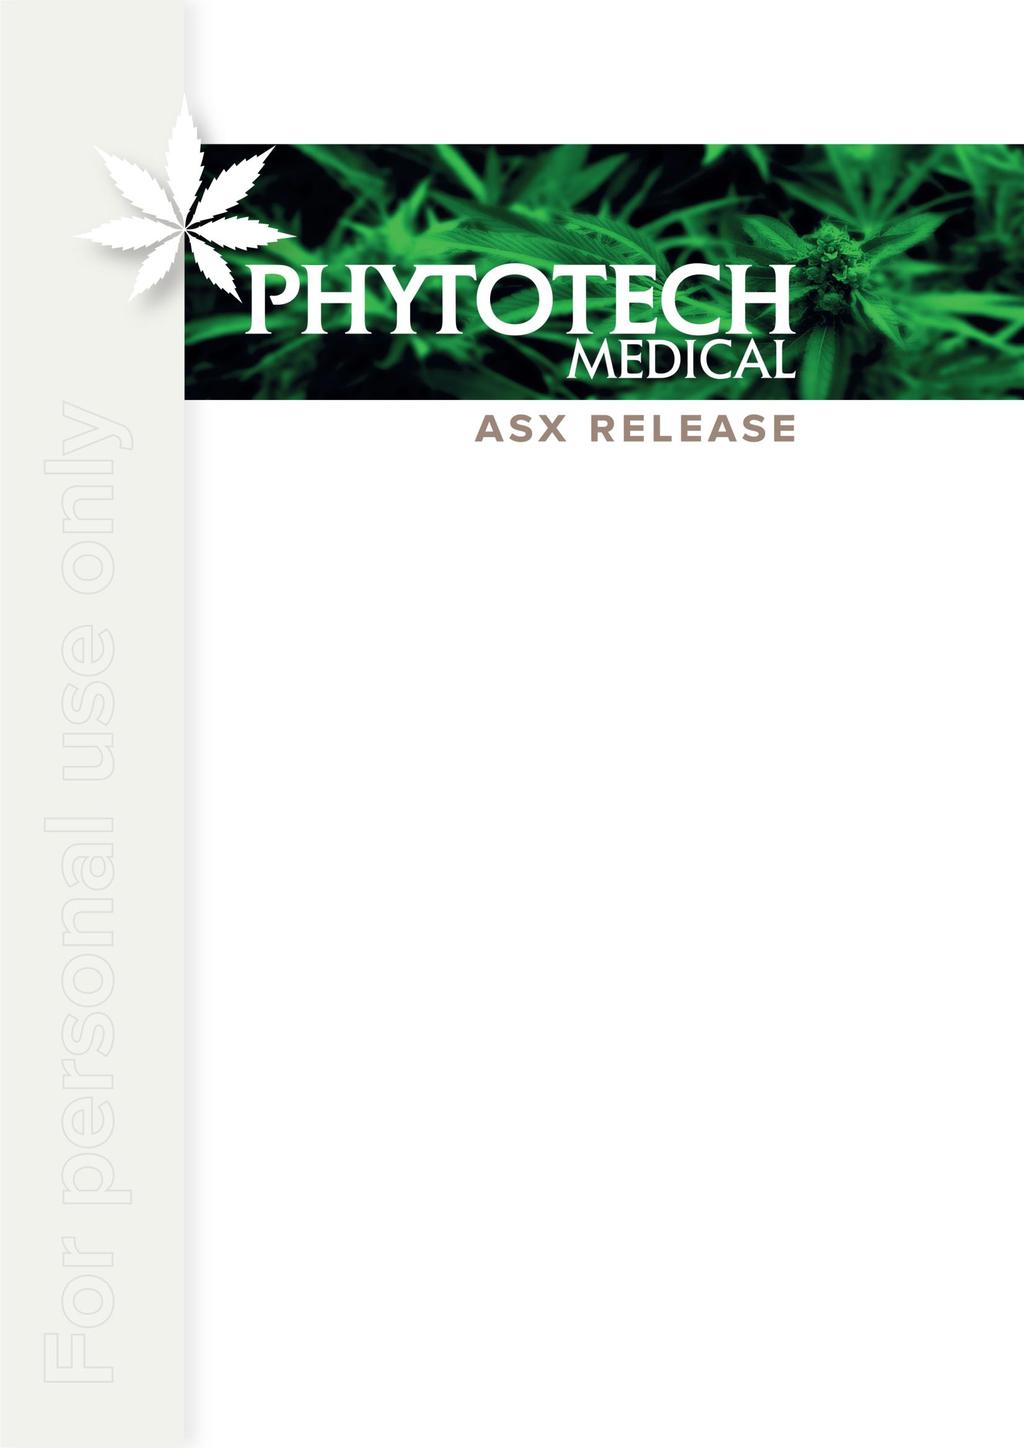 22 January 2015 PHYTOTECH, FIRST MEDICAL CANNABIS COMPANY TO LIST ON THE ASX Highlights Led by a highly qualified, specialised and experienced medical and